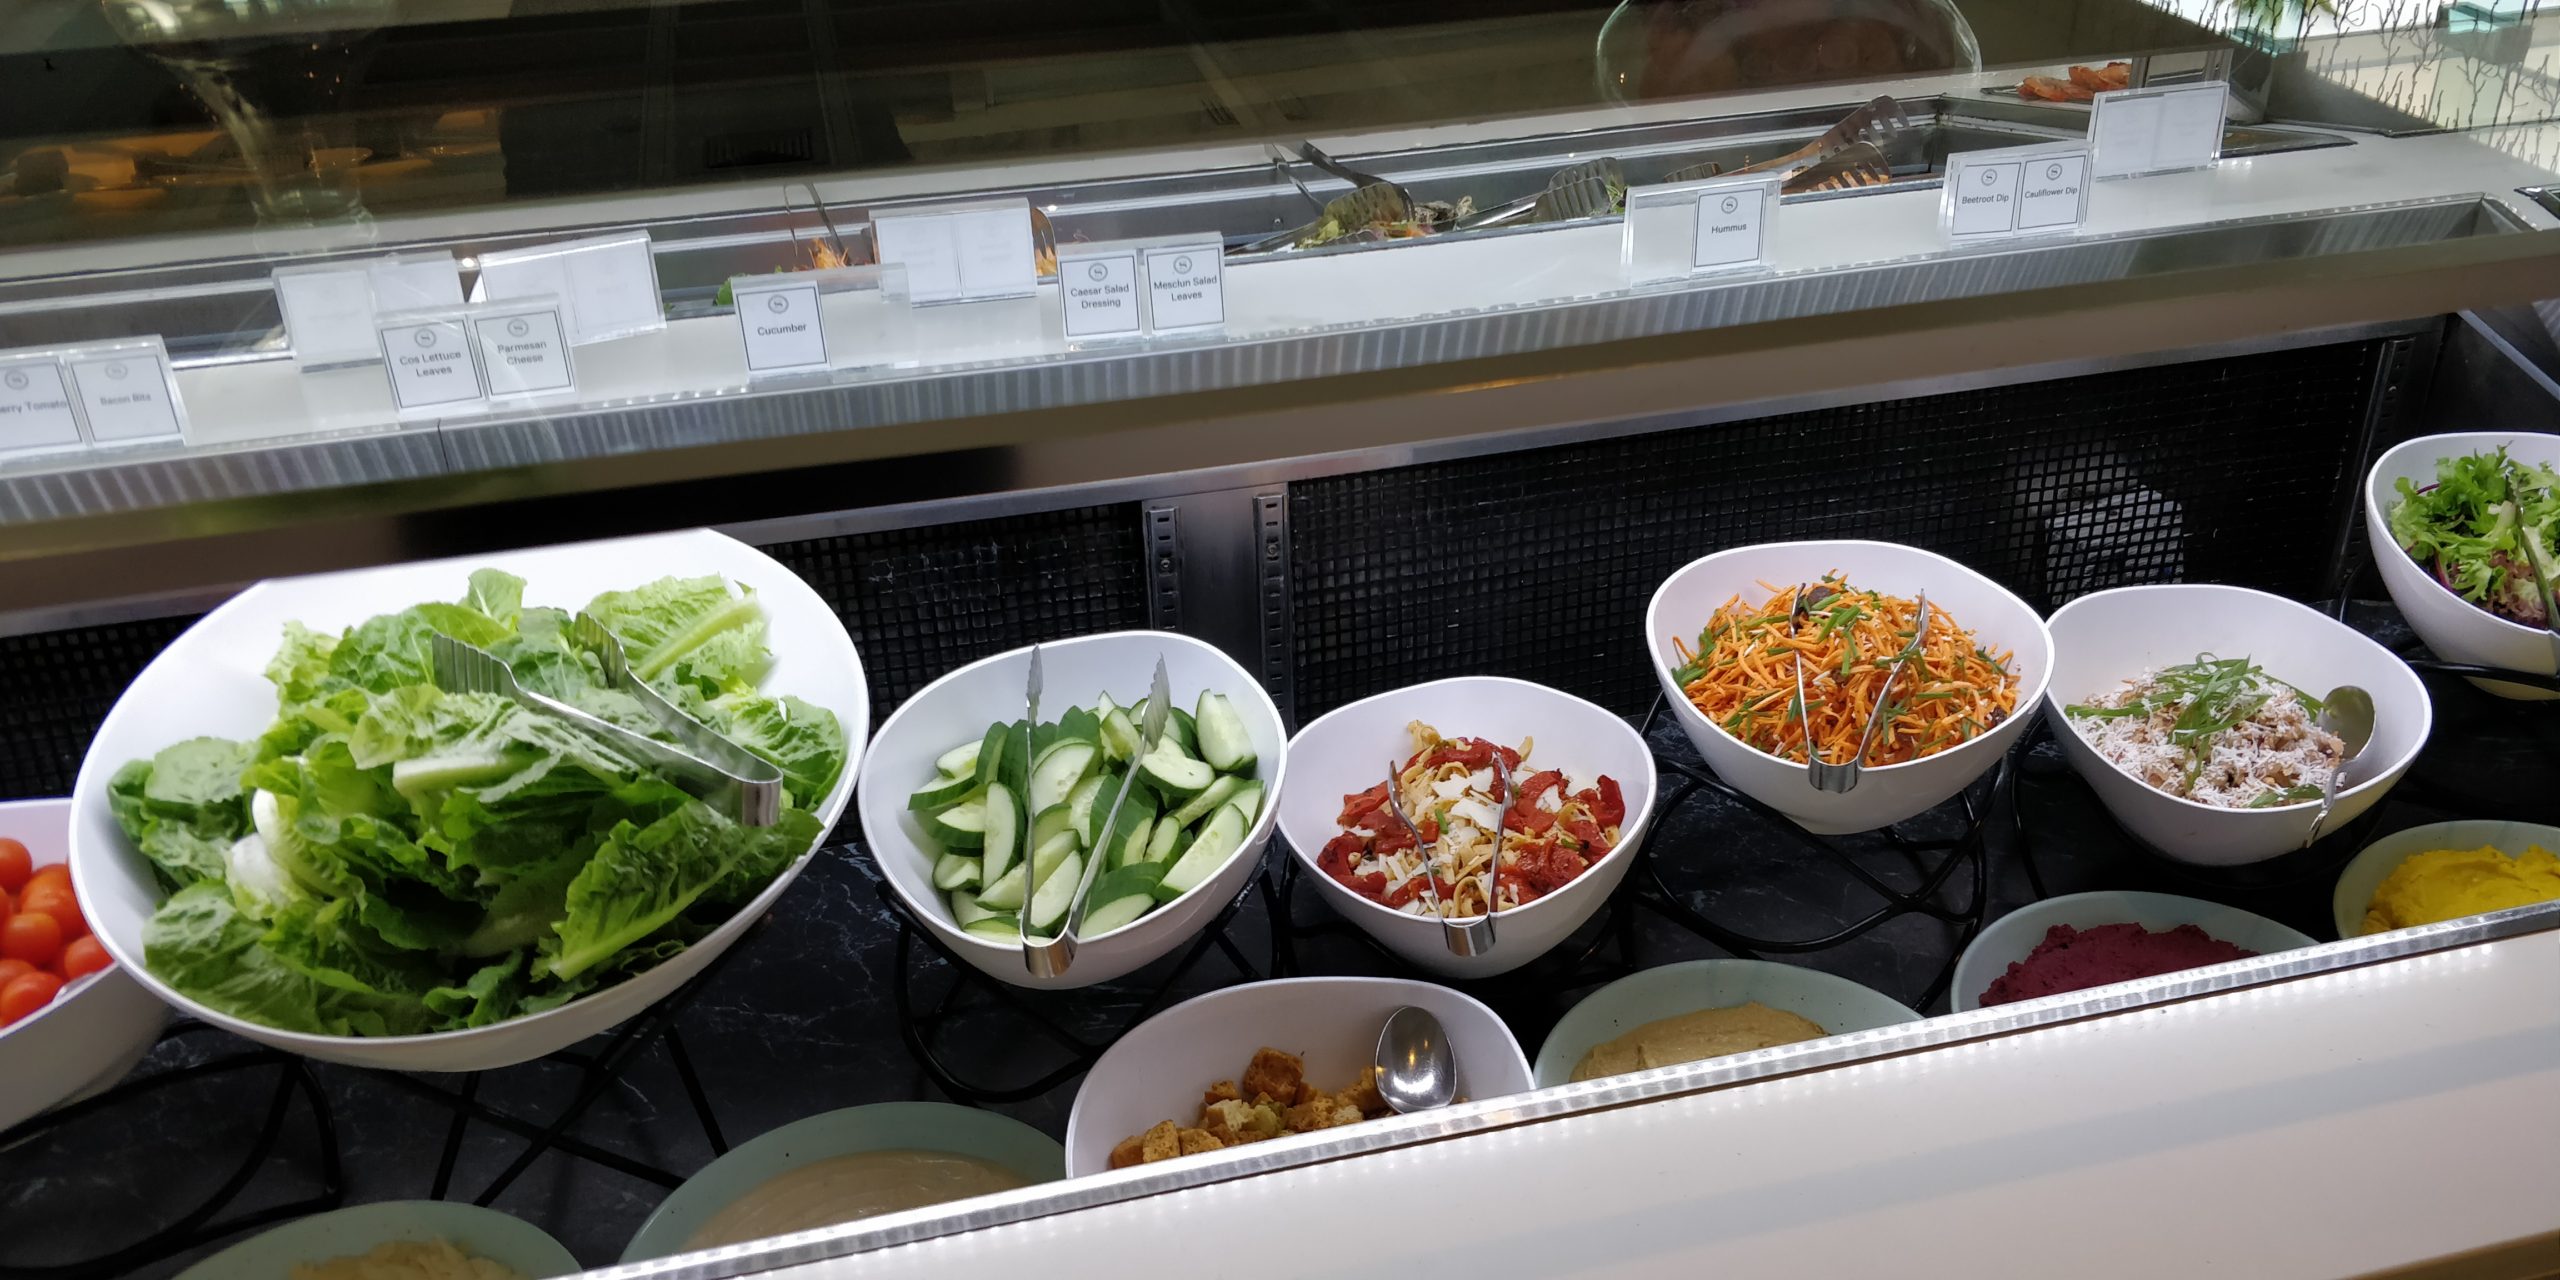 Review the Grand Mirage Resort
picture of the salad bar